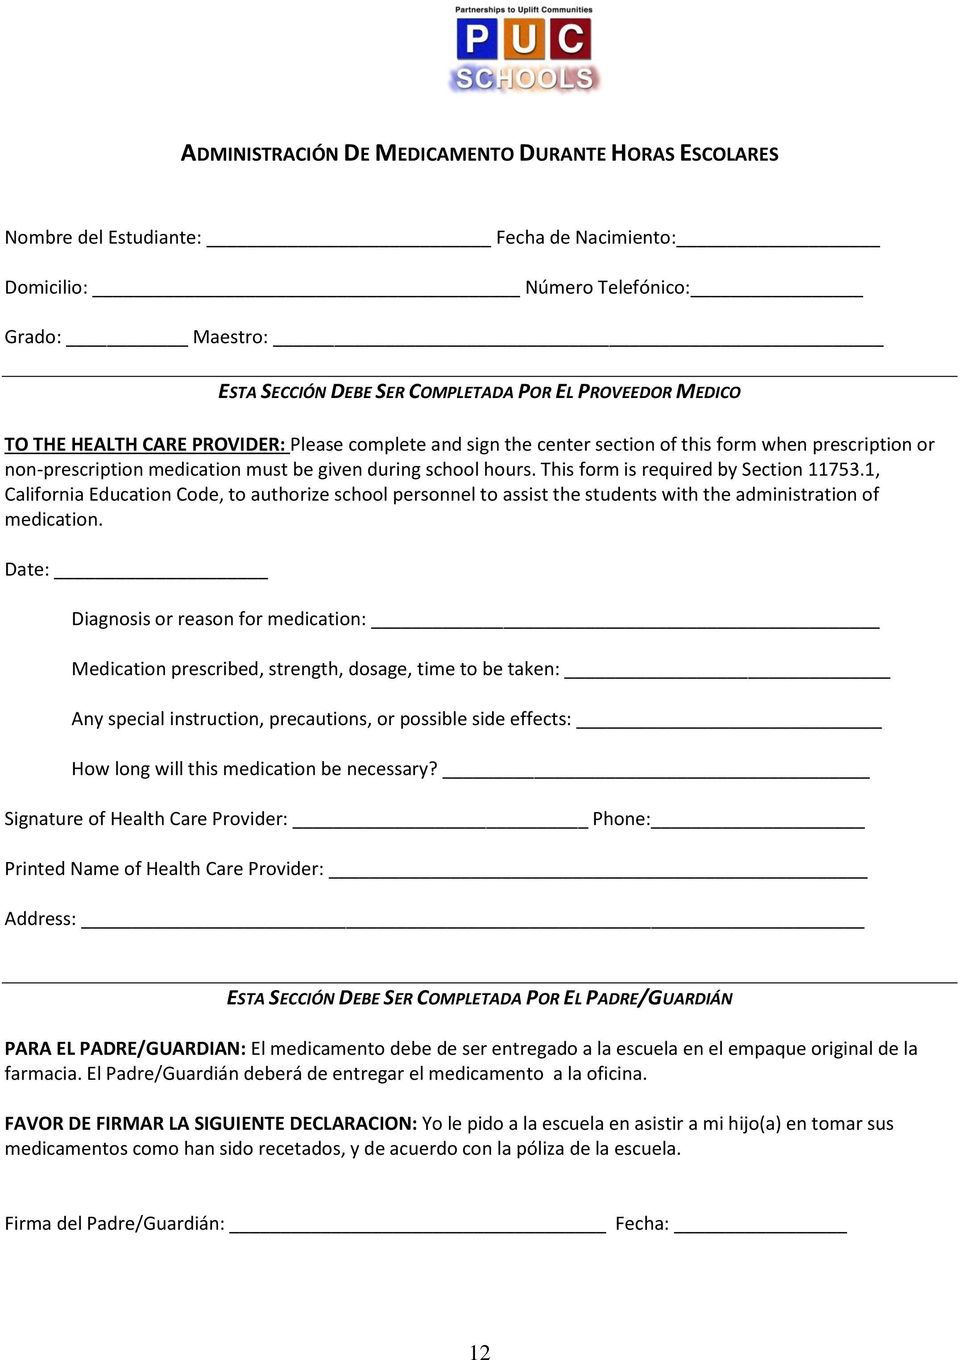 This form is required by Section 11753.1, California Education Code, to authorize school personnel to assist the students with the administration of medication.